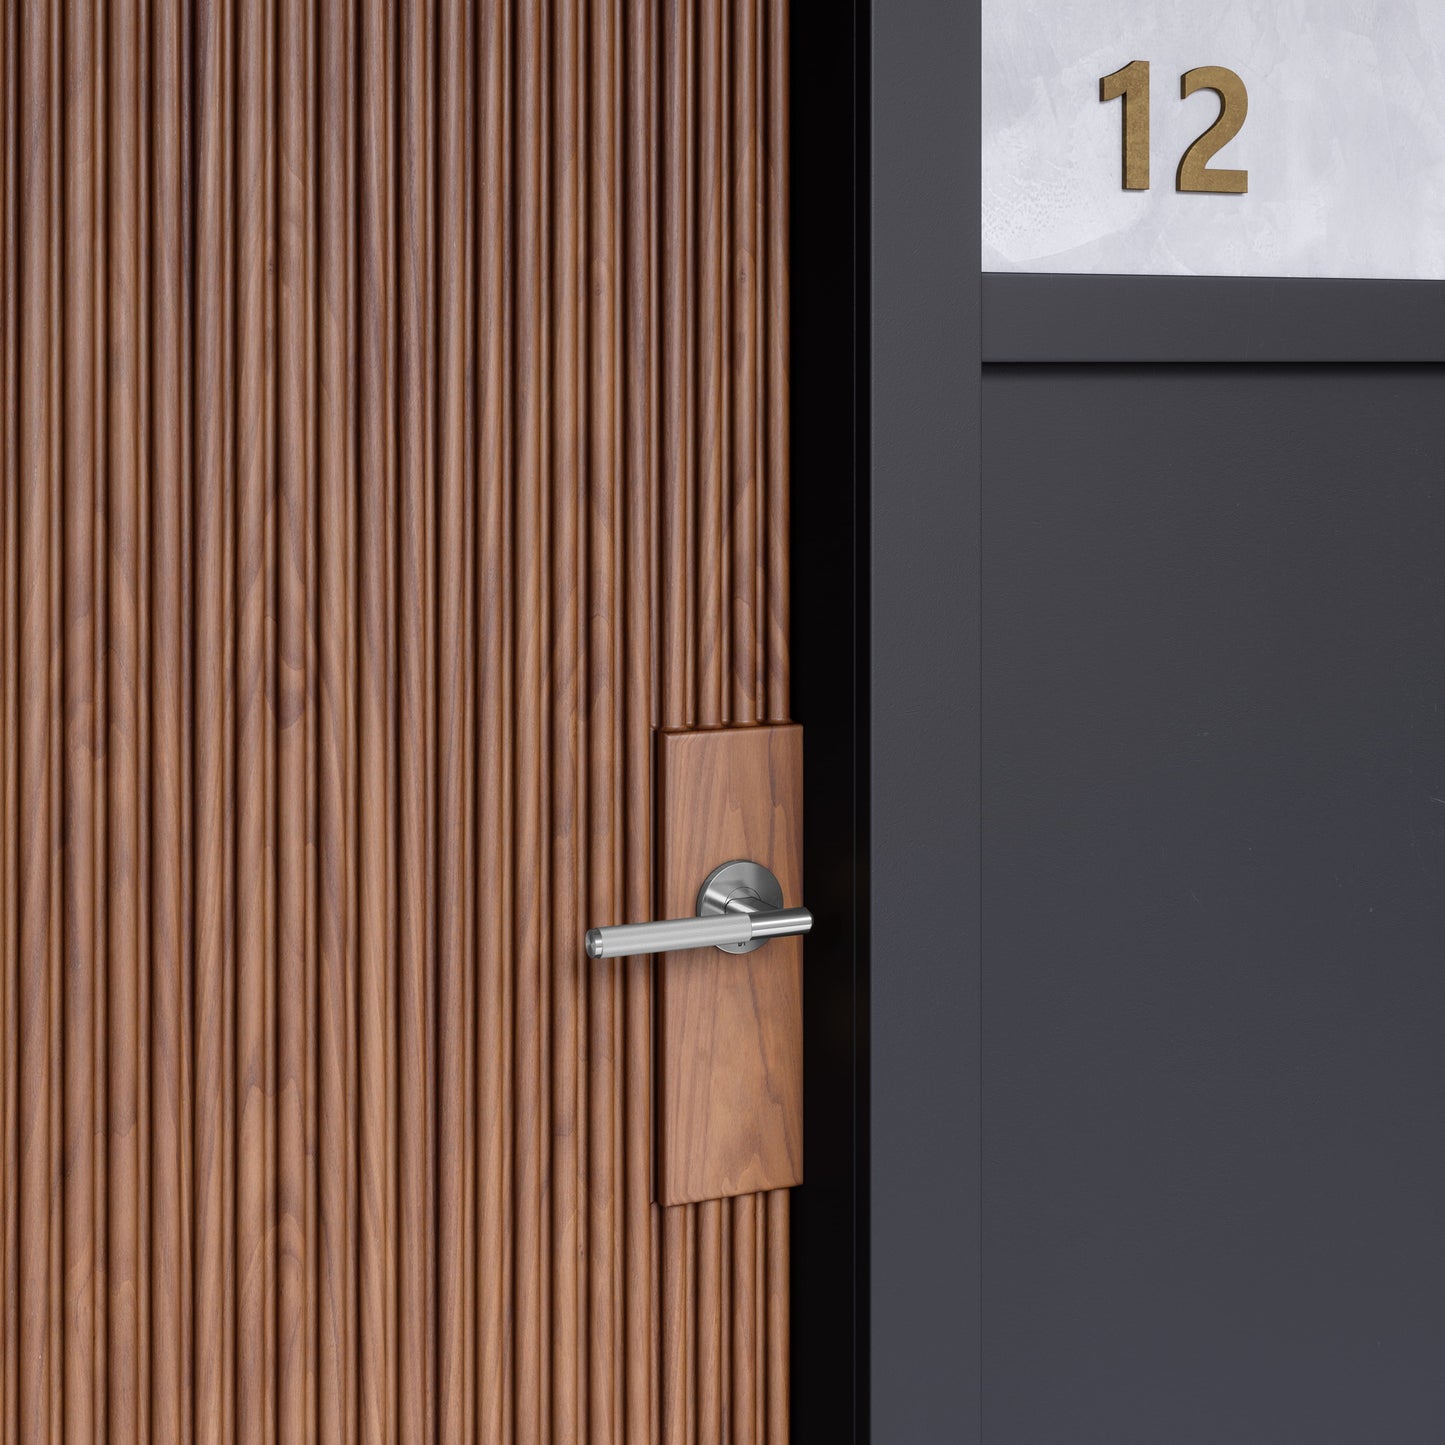 DOOR HANDLES - LINEAR  BY BUSTER + PUNCH from $220